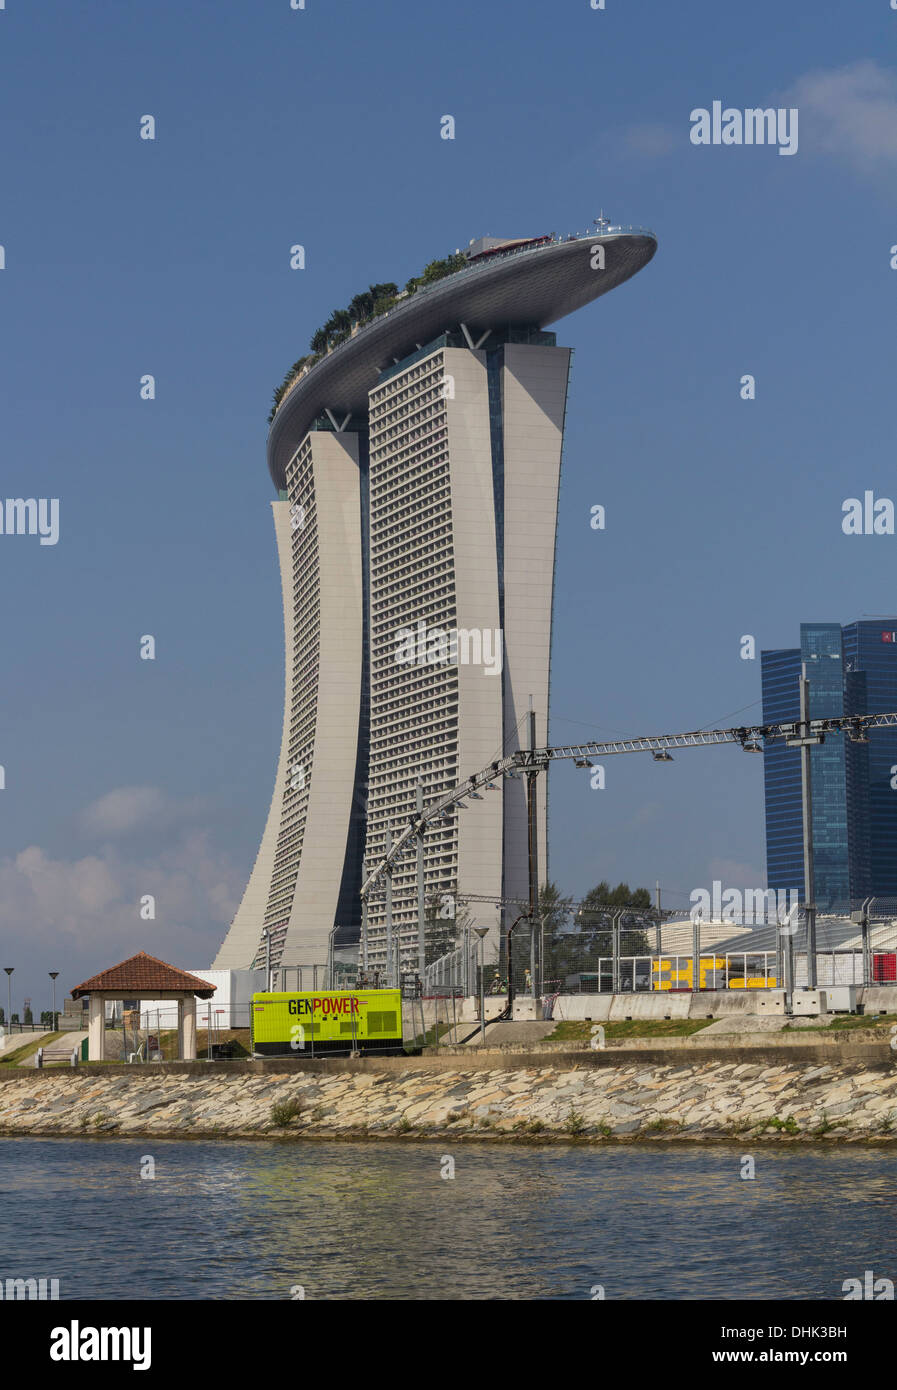 Marina Bay Sands hotel along with lighting equipment for the Formula One race in Singapore. Sands Skypark seen on top. Stock Photo